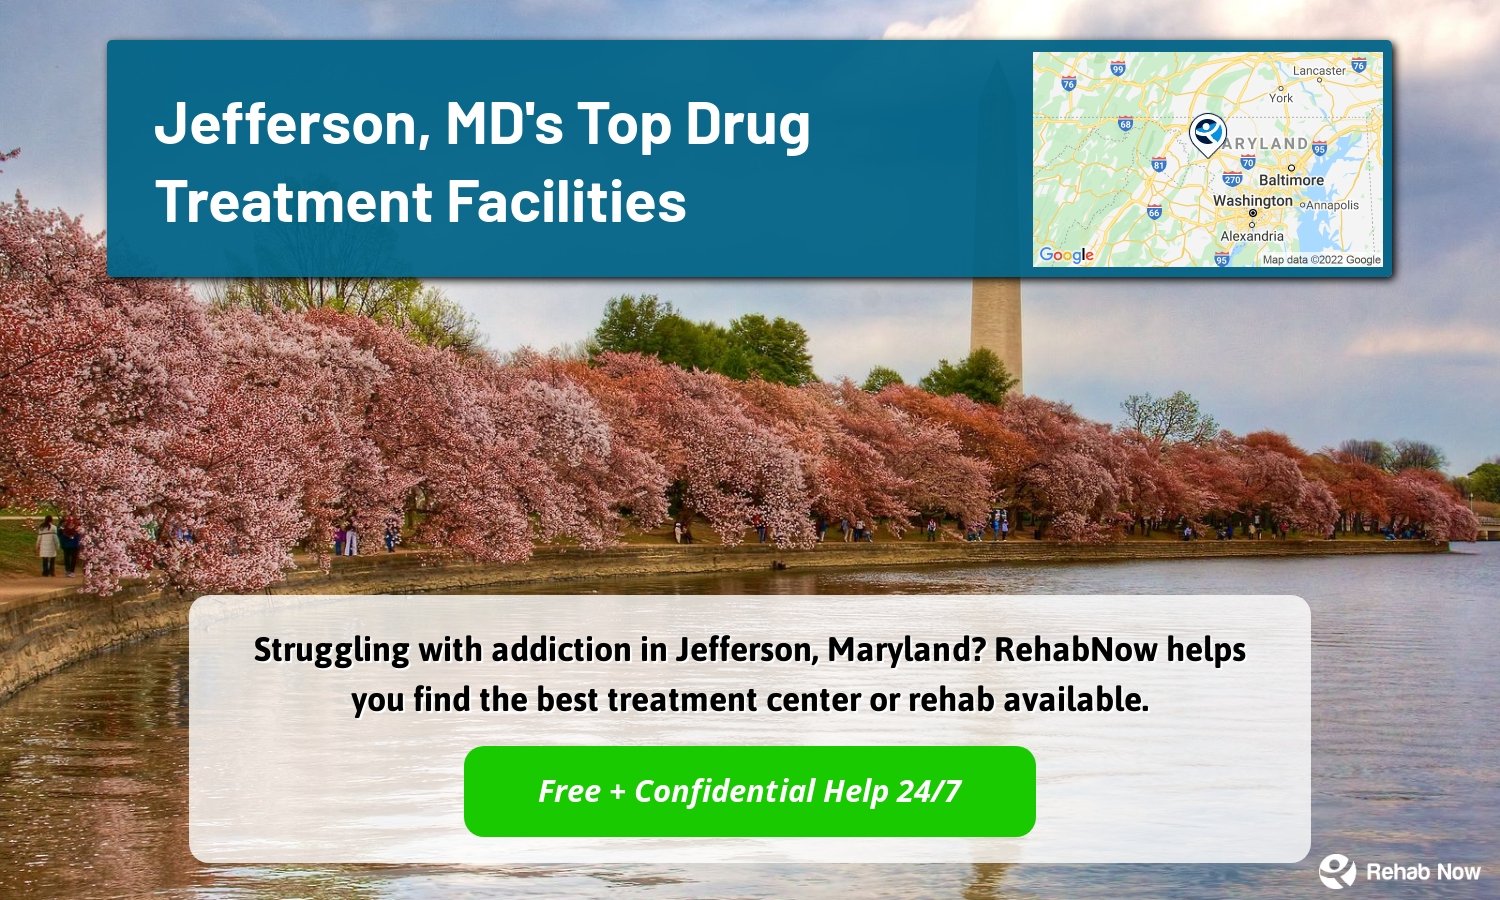 Struggling with addiction in Jefferson, Maryland? RehabNow helps you find the best treatment center or rehab available.